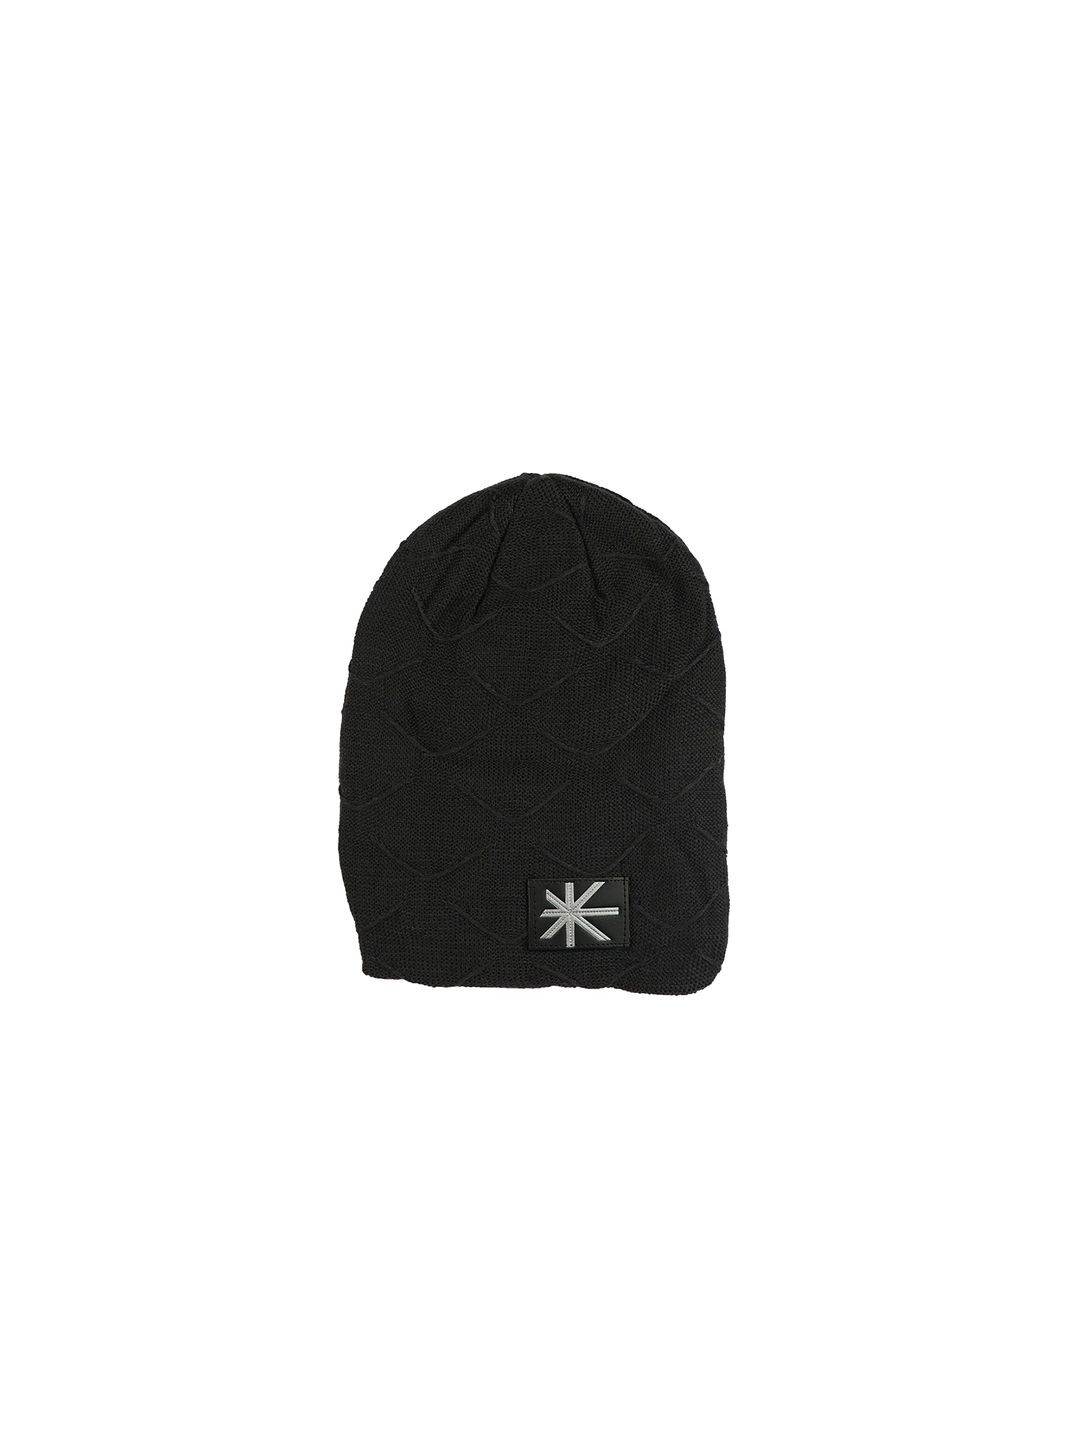 iSWEVEN Unisex Grey Solid Beanie Price in India